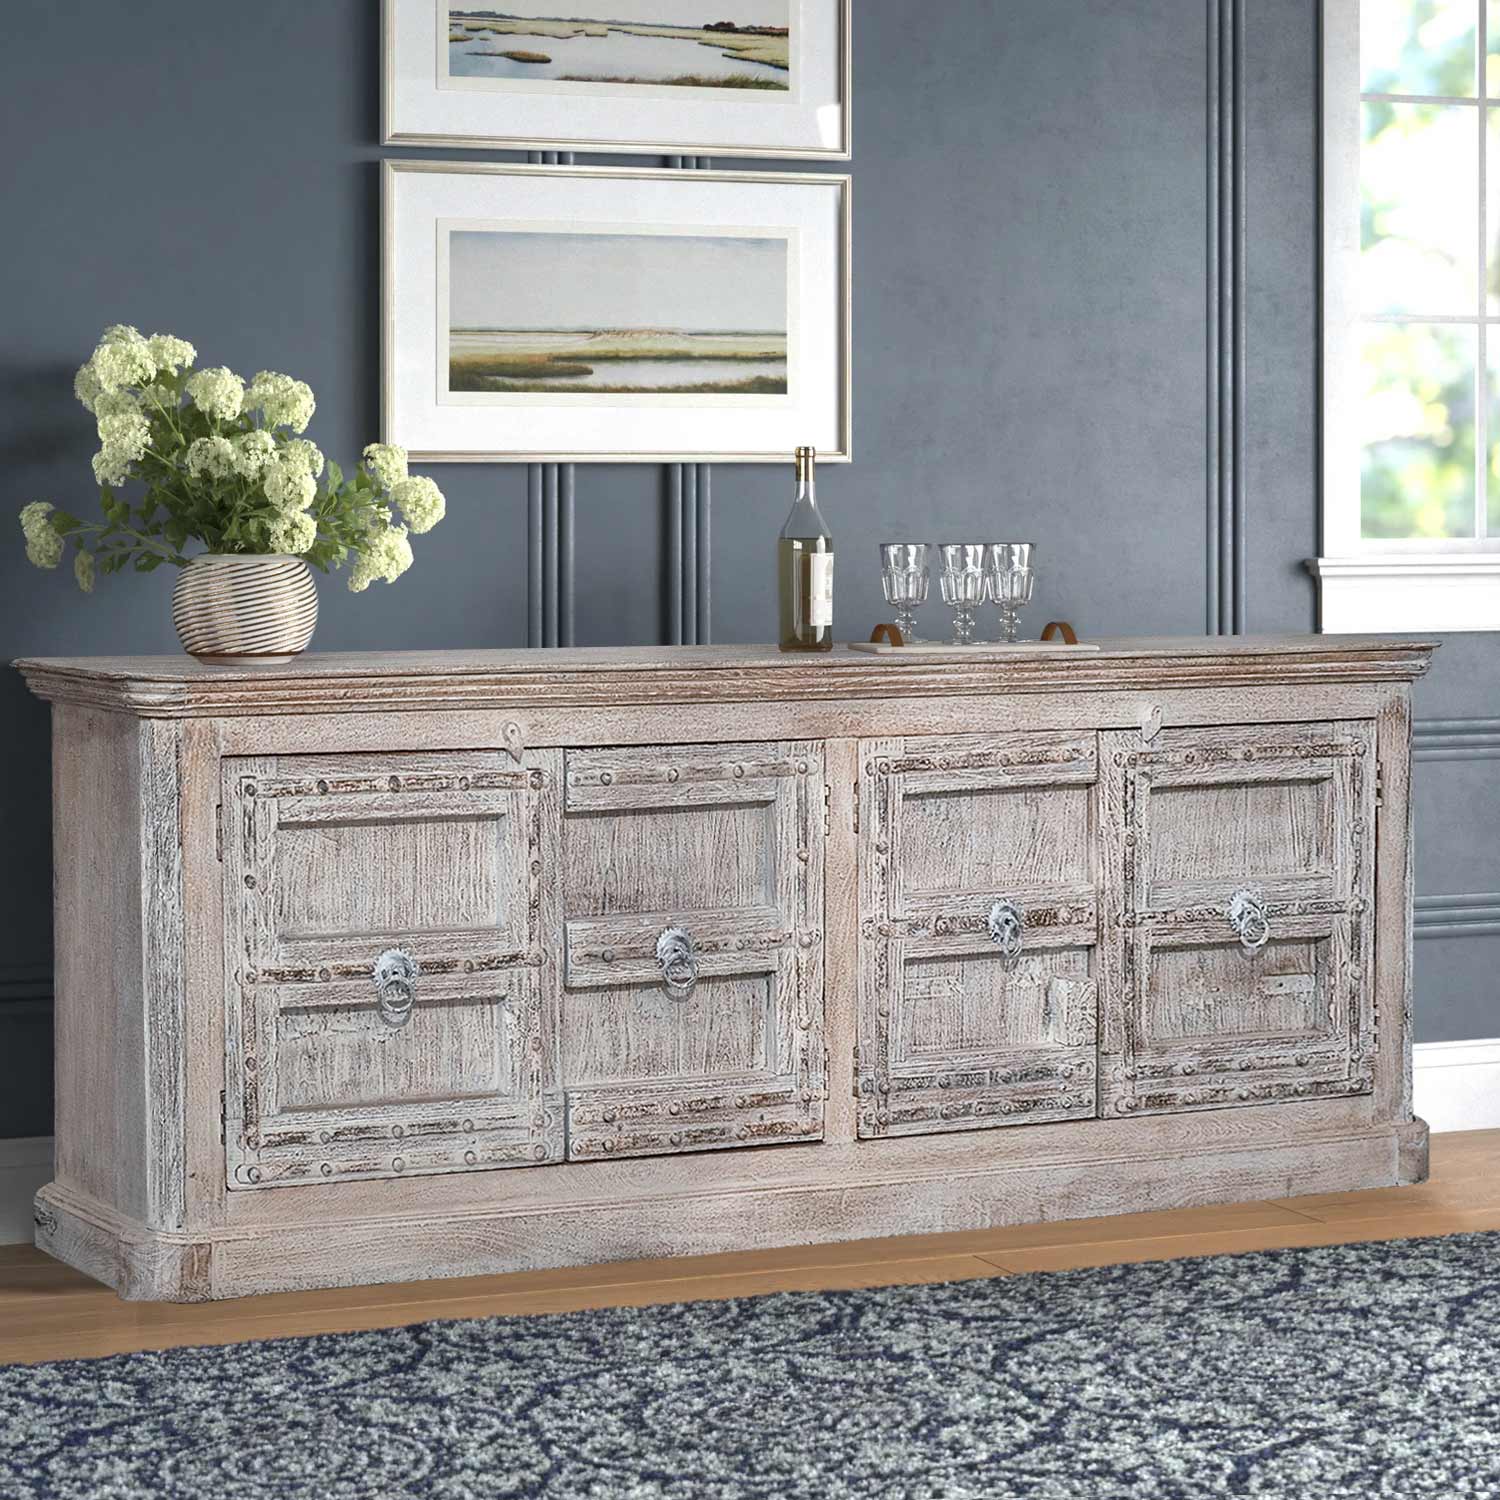 Extra Large 4 Door Solid Wood Dining Room Buffet Rustic Storage